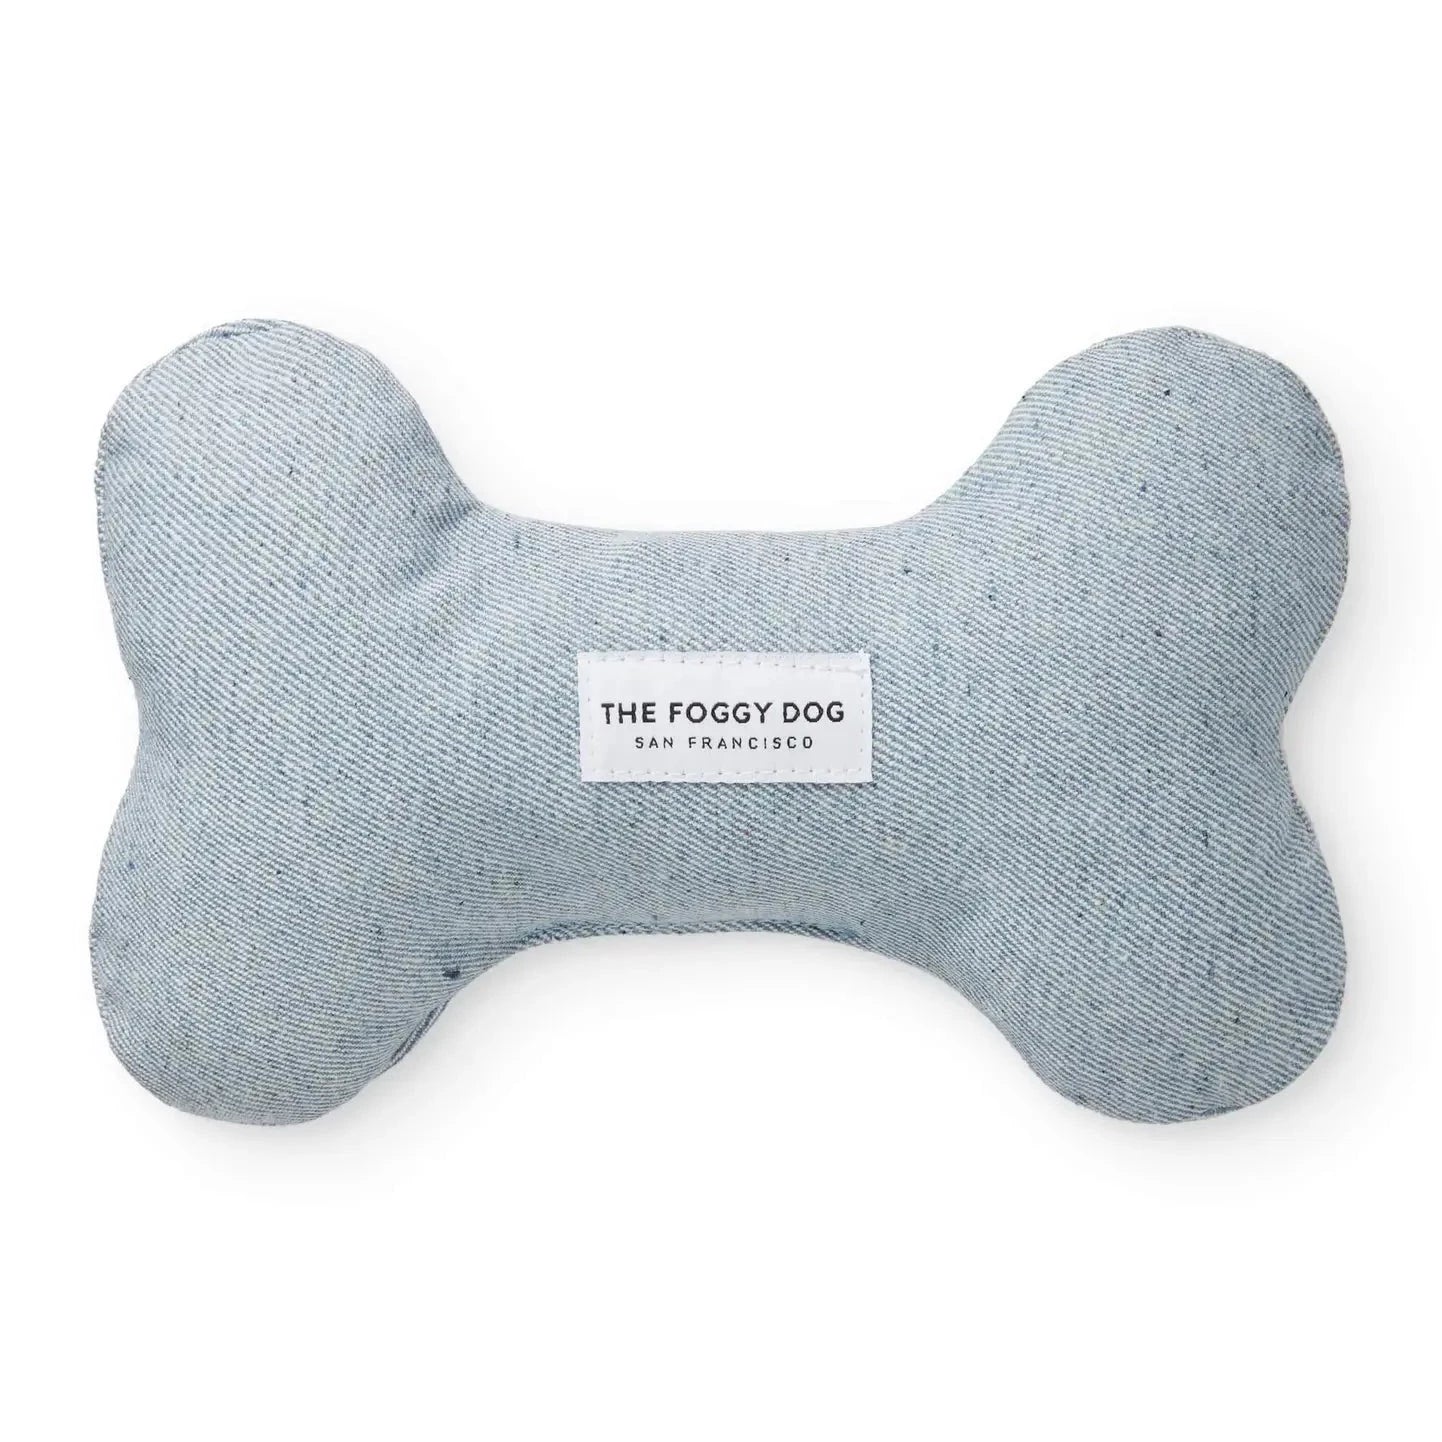 Light blue denim dog squeaky bone shaped toy. Has white label stitched in the middle